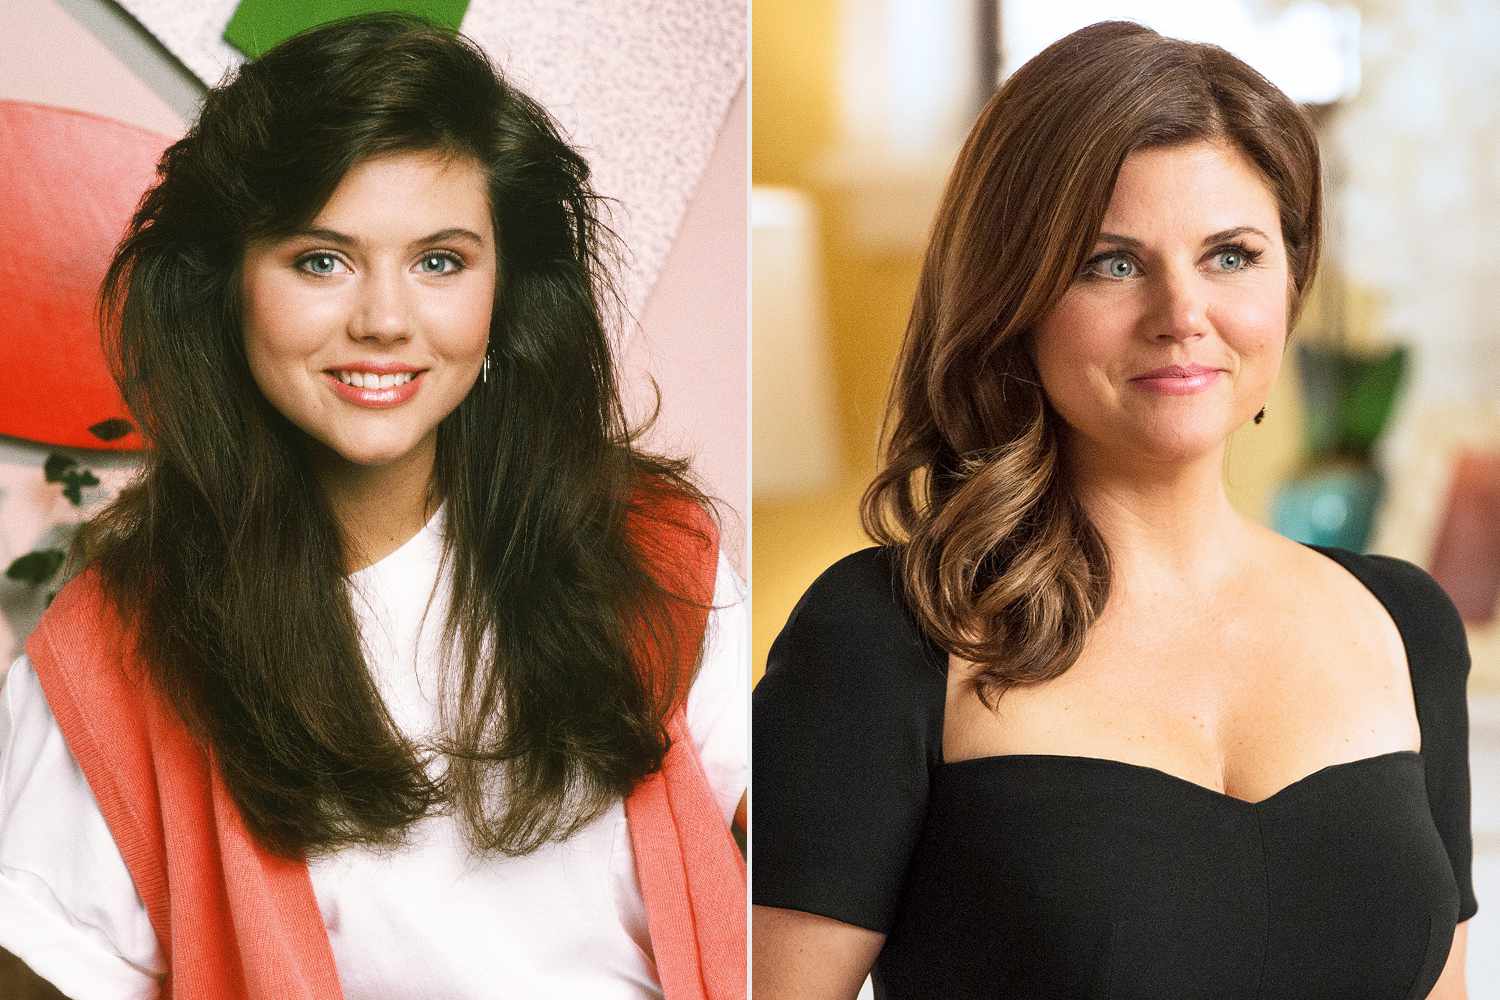 Tiffani Thiessen Says “Saved By The Bell” Had 'Huge Impact' on Her, but Reveals What Show Is 'Close to My Heart' (Exclusive)